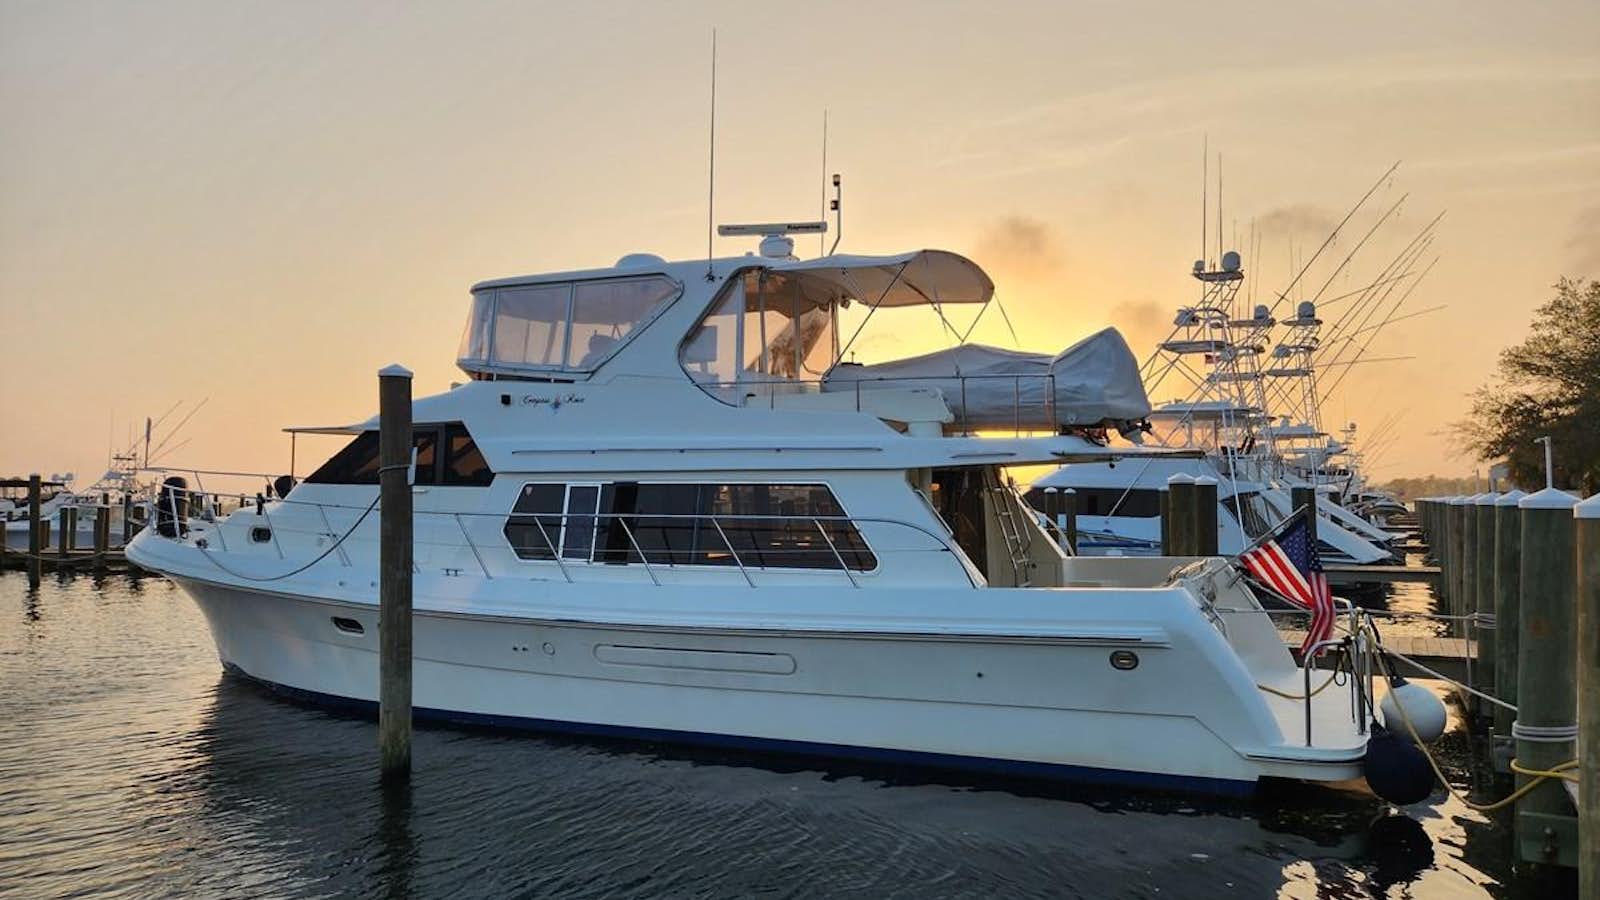 Compass rose
Yacht for Sale